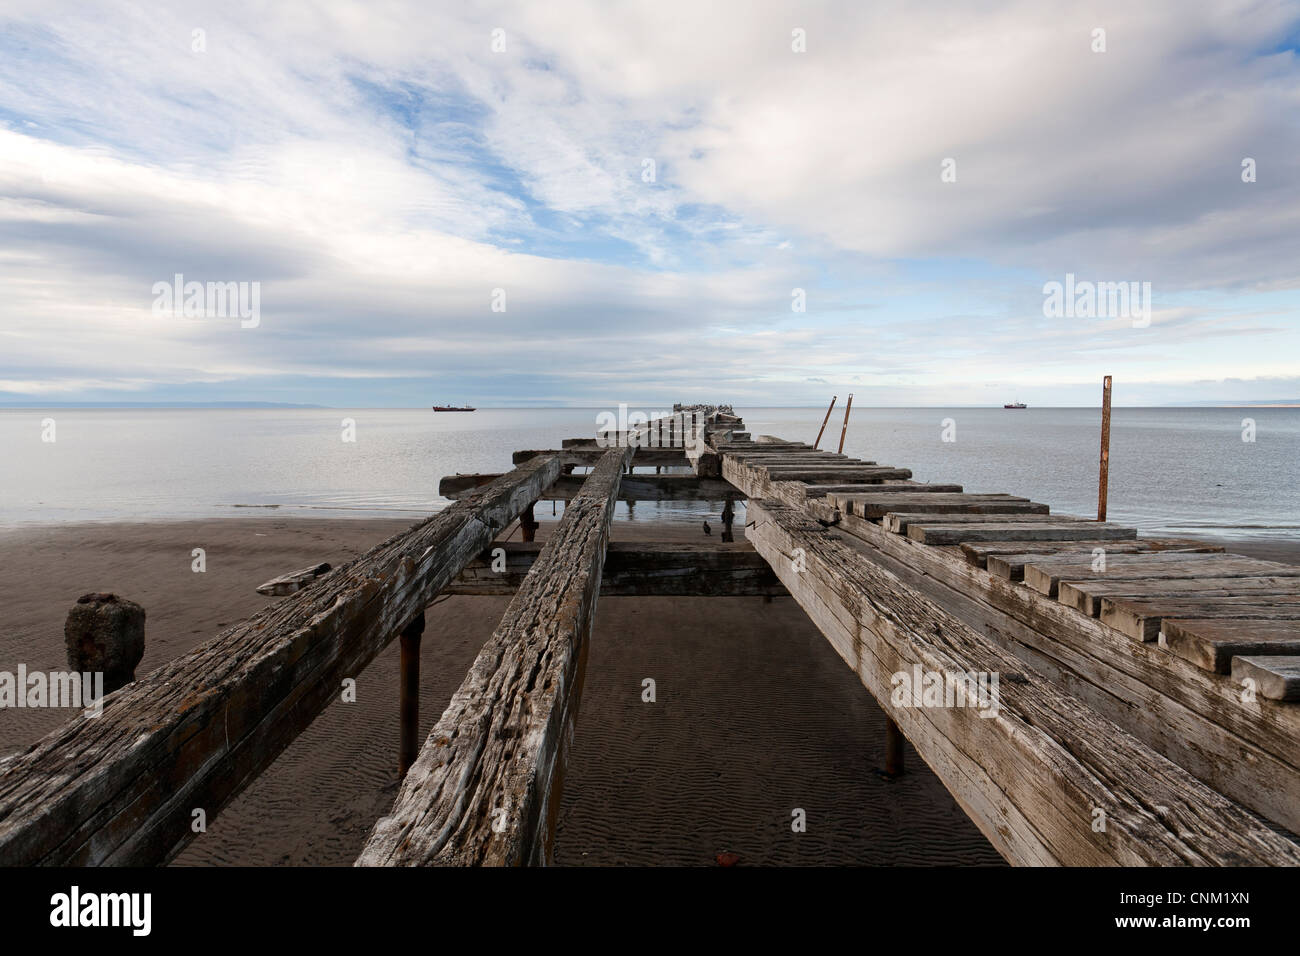 Old pier in Punta Arenas, Patagonia Chilena, Chile Stock Photo